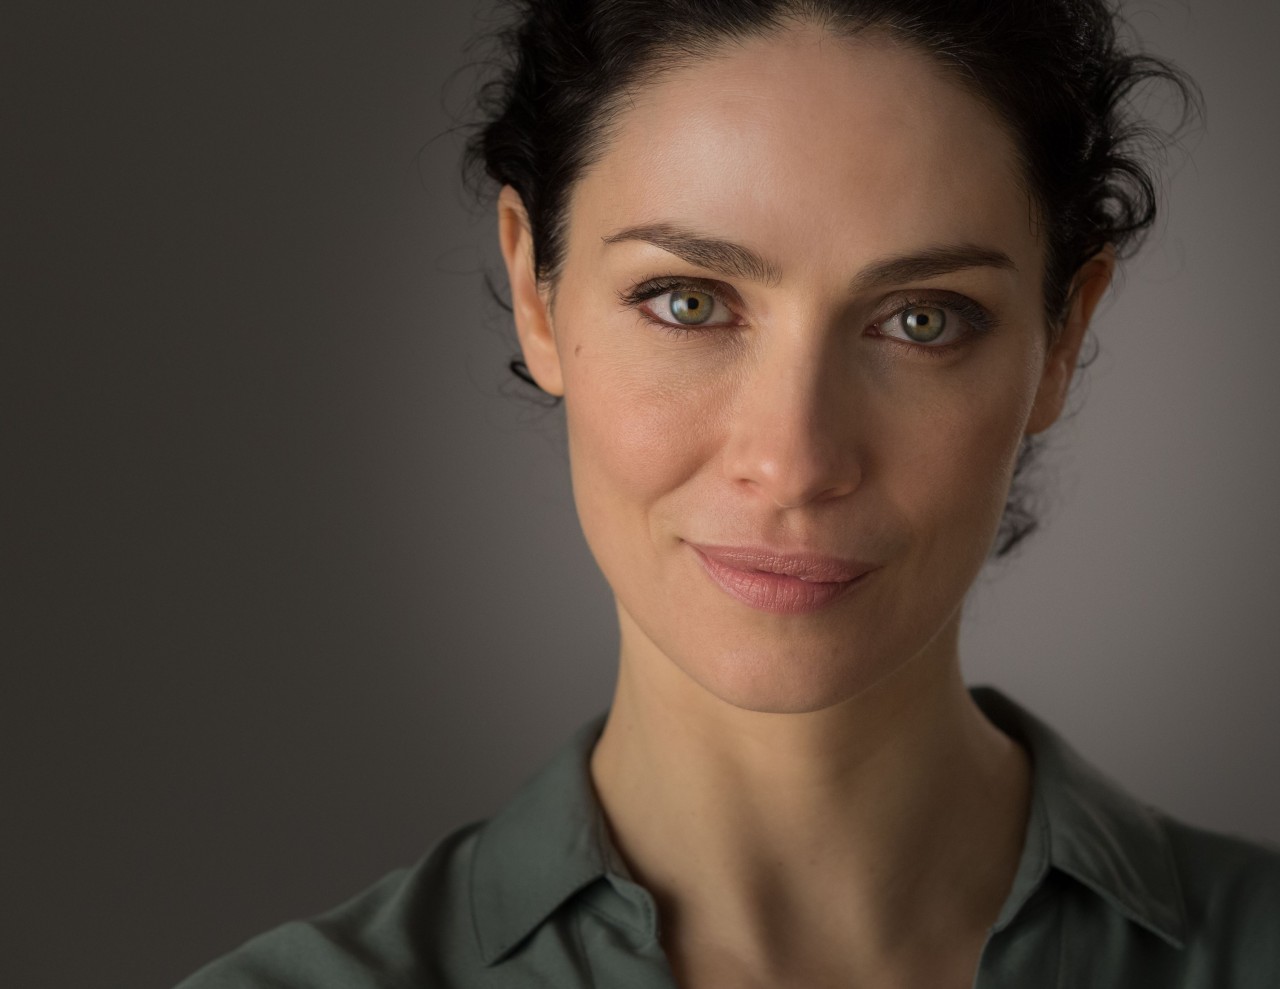 Joanne Kelly Plastic Surgery and Body Measurements